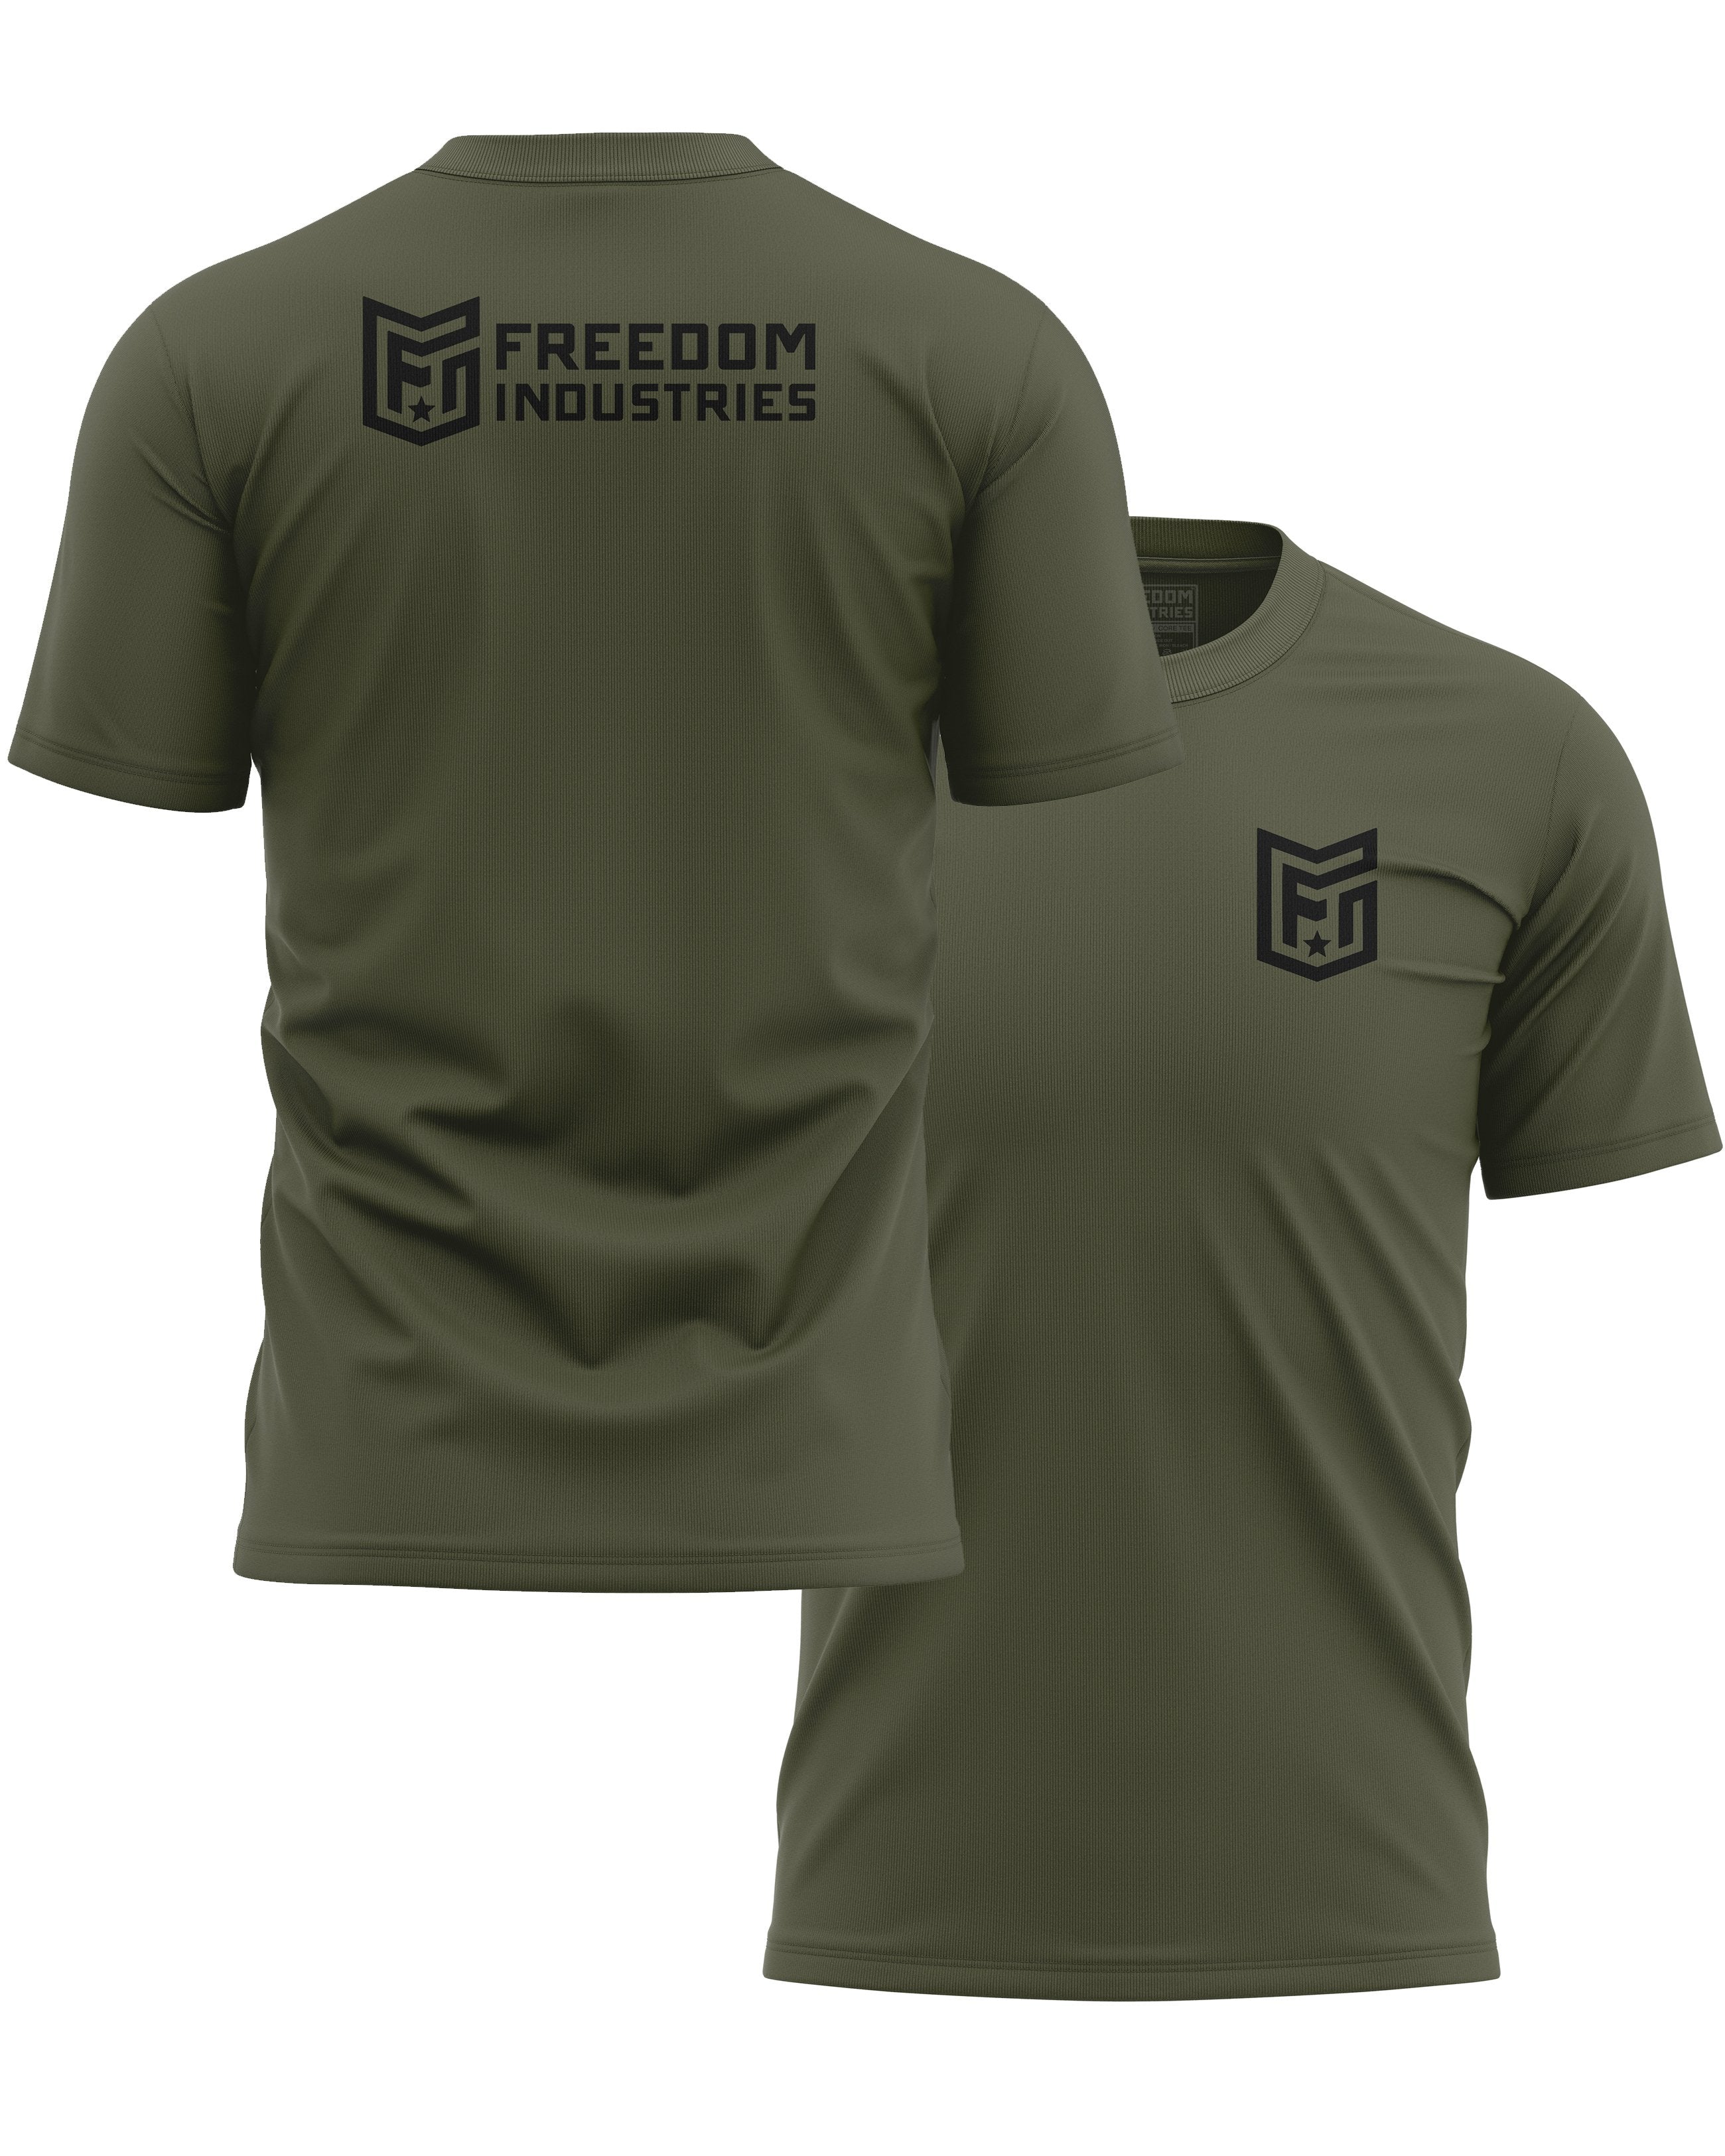 LOGO CORE TEE - OLIVE - FREEDOM INDUSTRIES (4606363402312) (4606376902728)